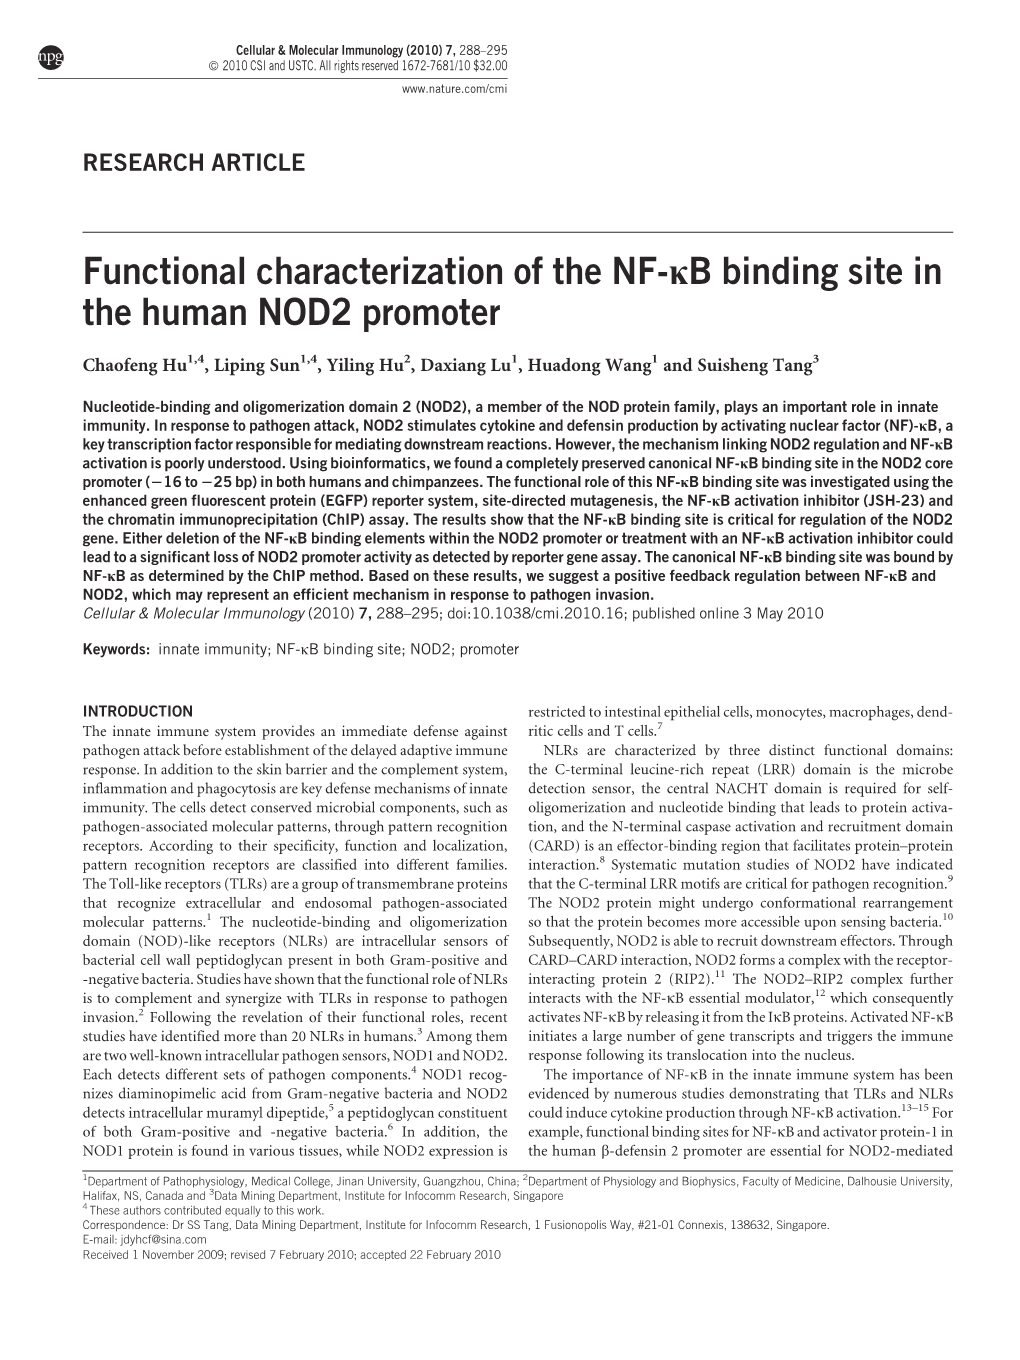 Functional Characterization of the NF-Κb Binding Site in the Human NOD2